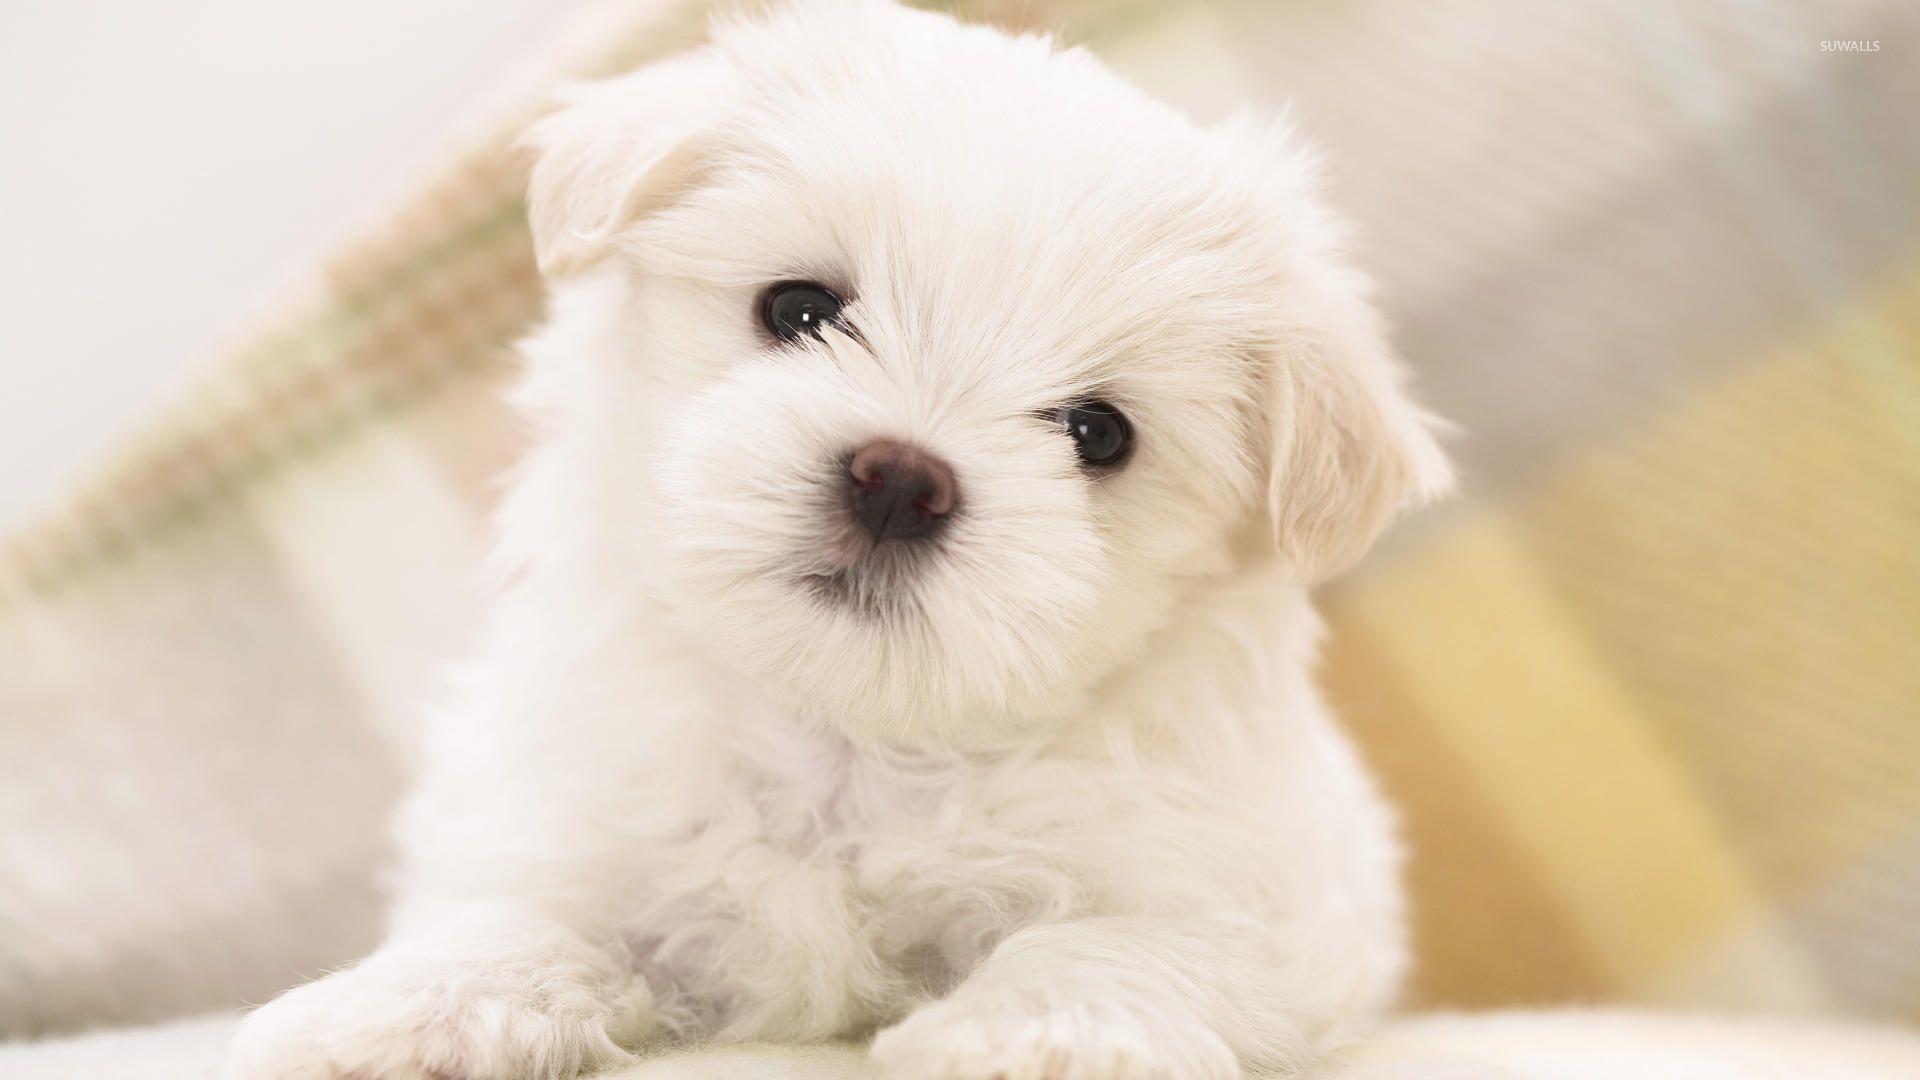 Cute white fluffy puppy with black eyes wallpaper